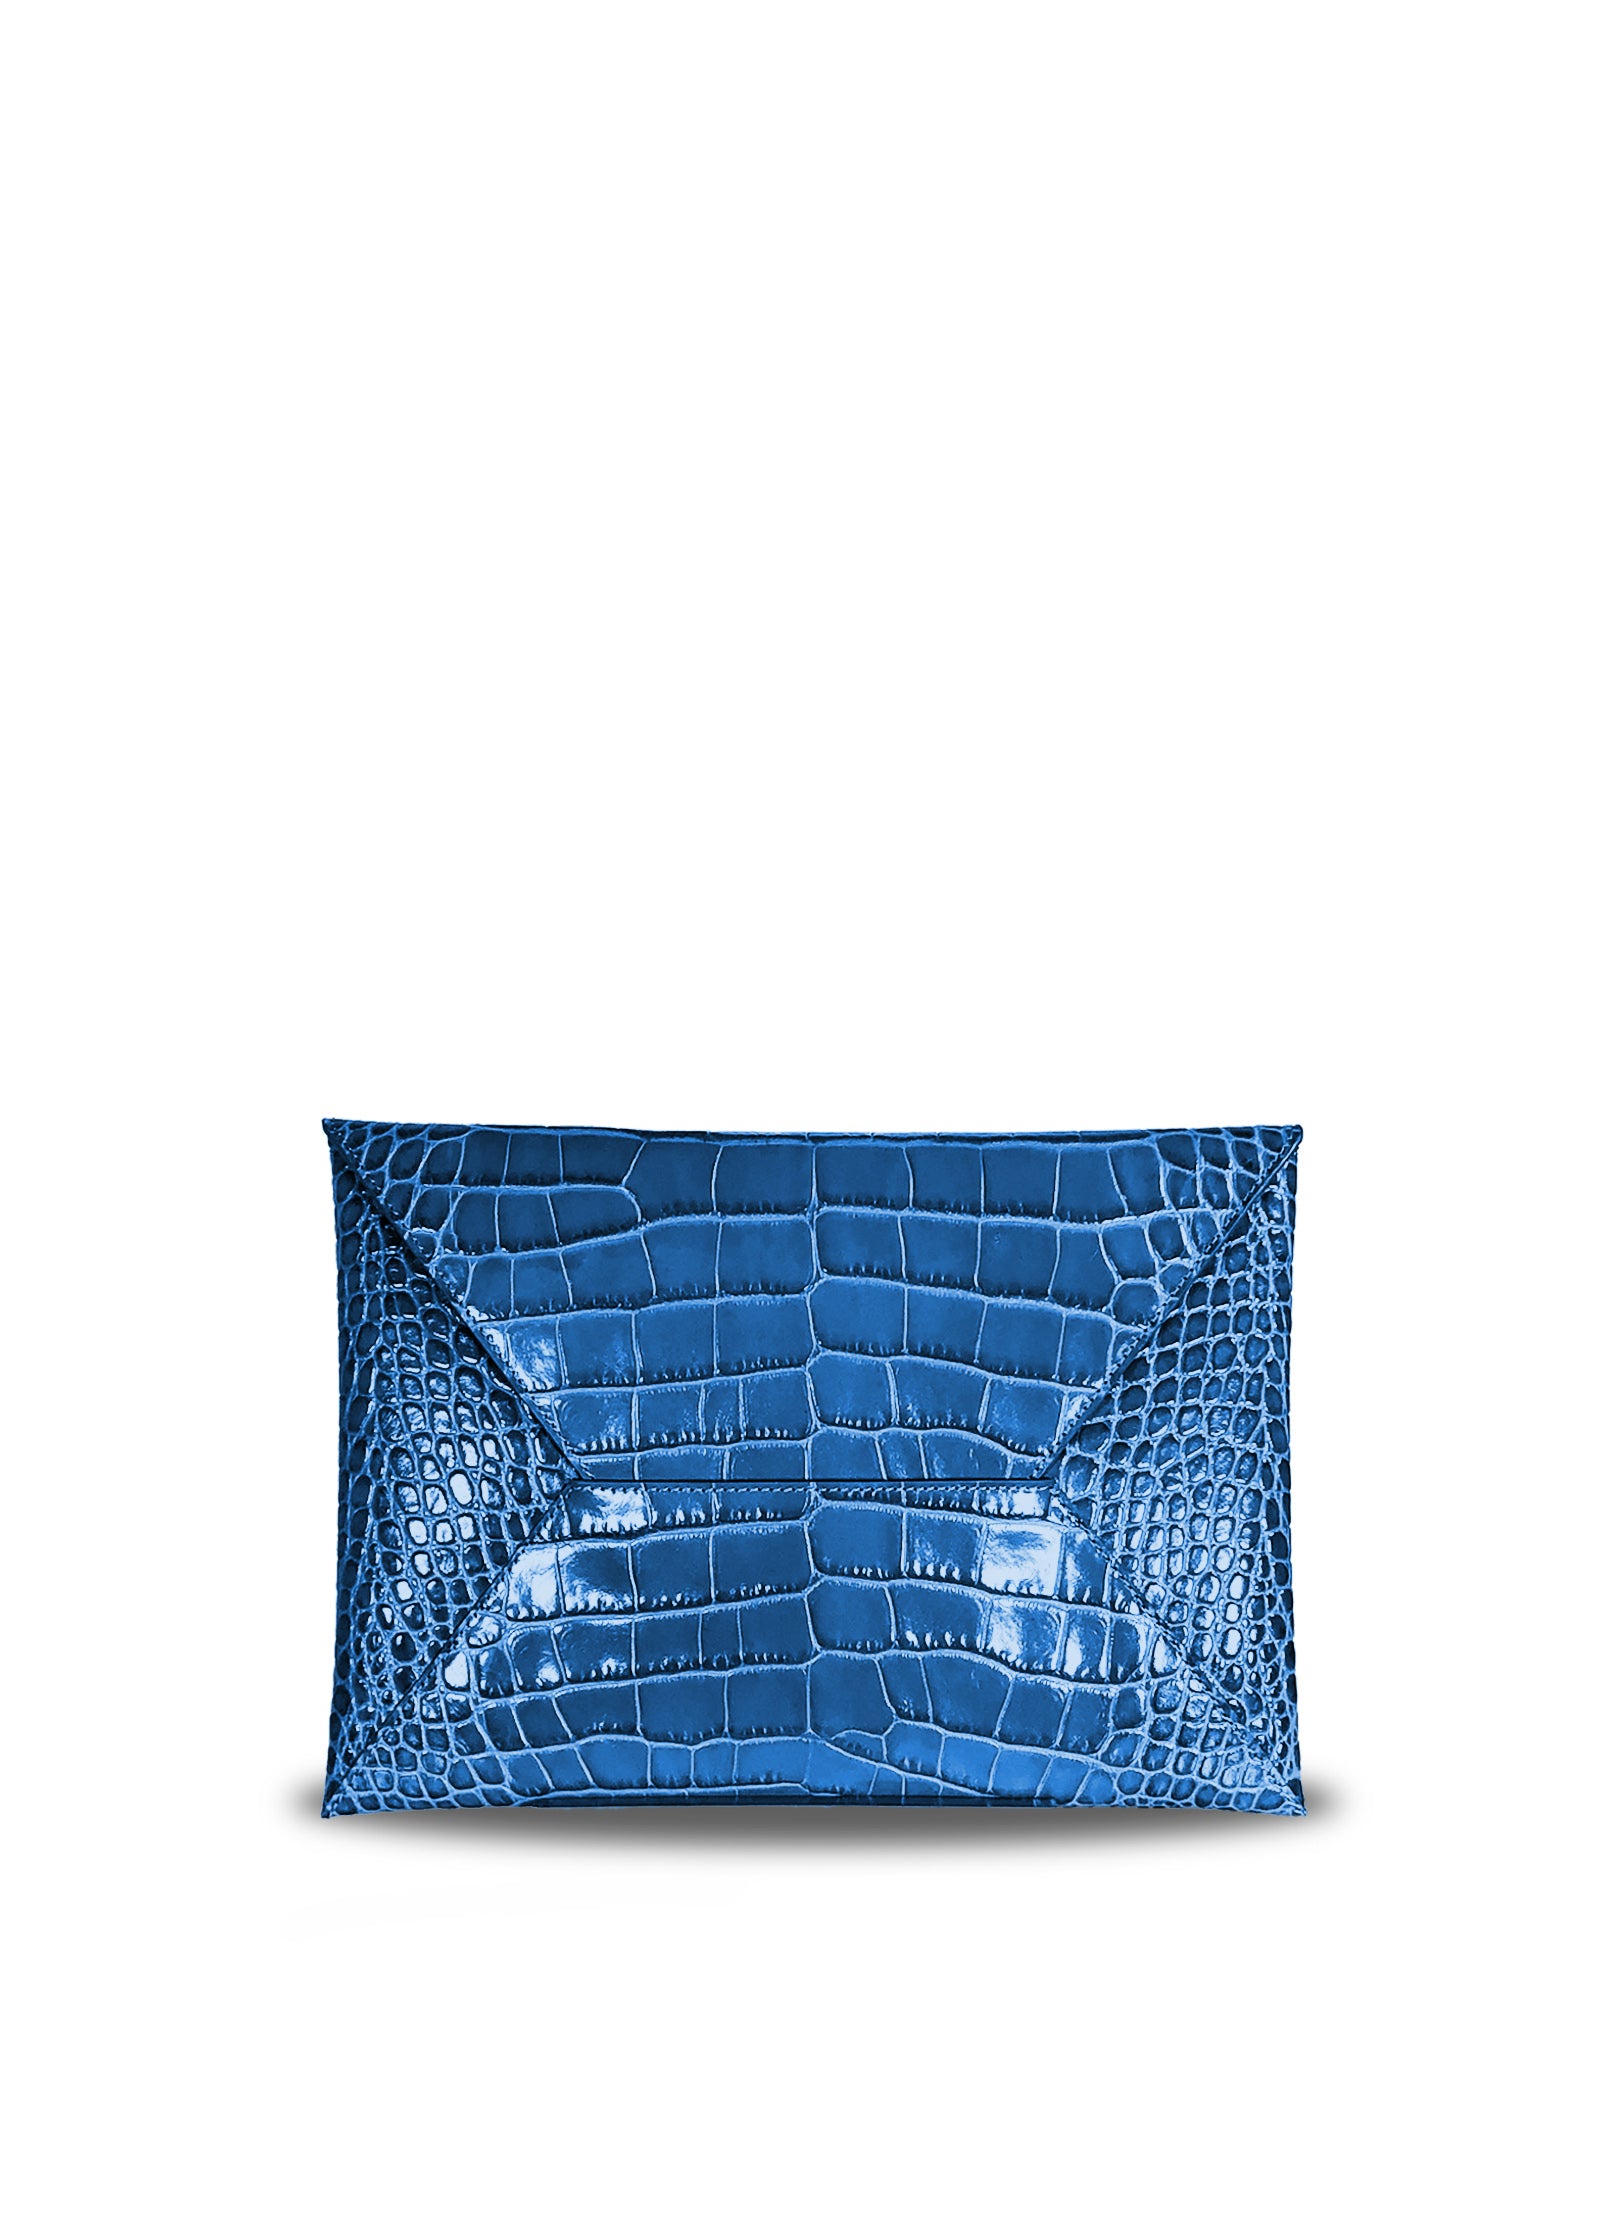 Embossed Leather Clutch Bag